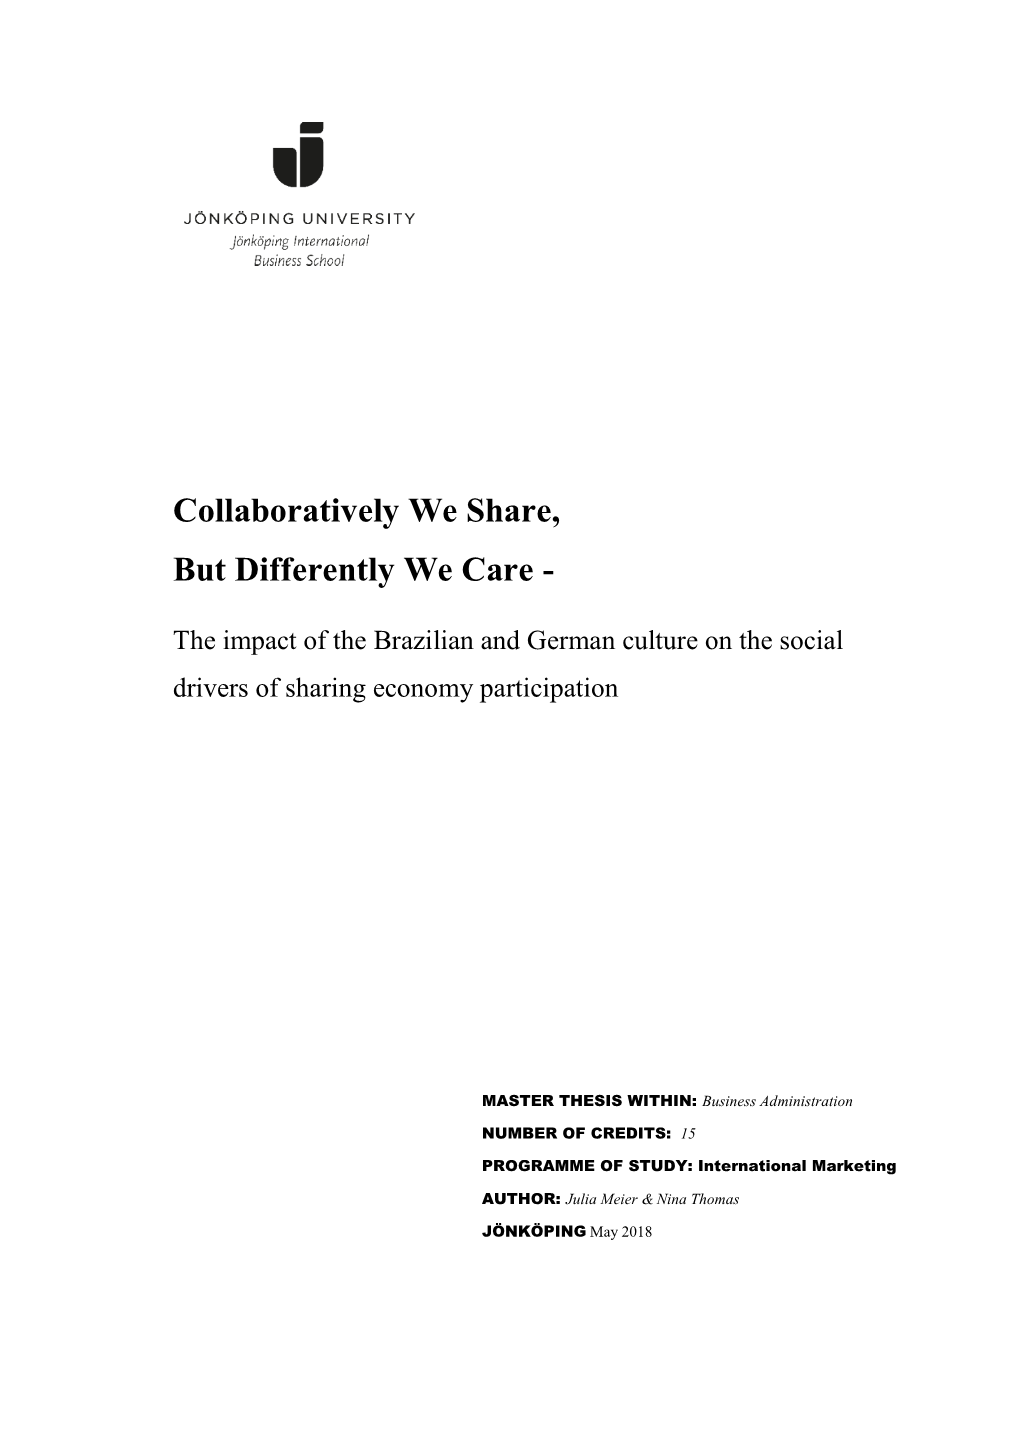 Collaboratively We Share, but Differently We Care - the Impact of the Brazilian and German Culture on the Social Drivers of Sharing Economy Participation